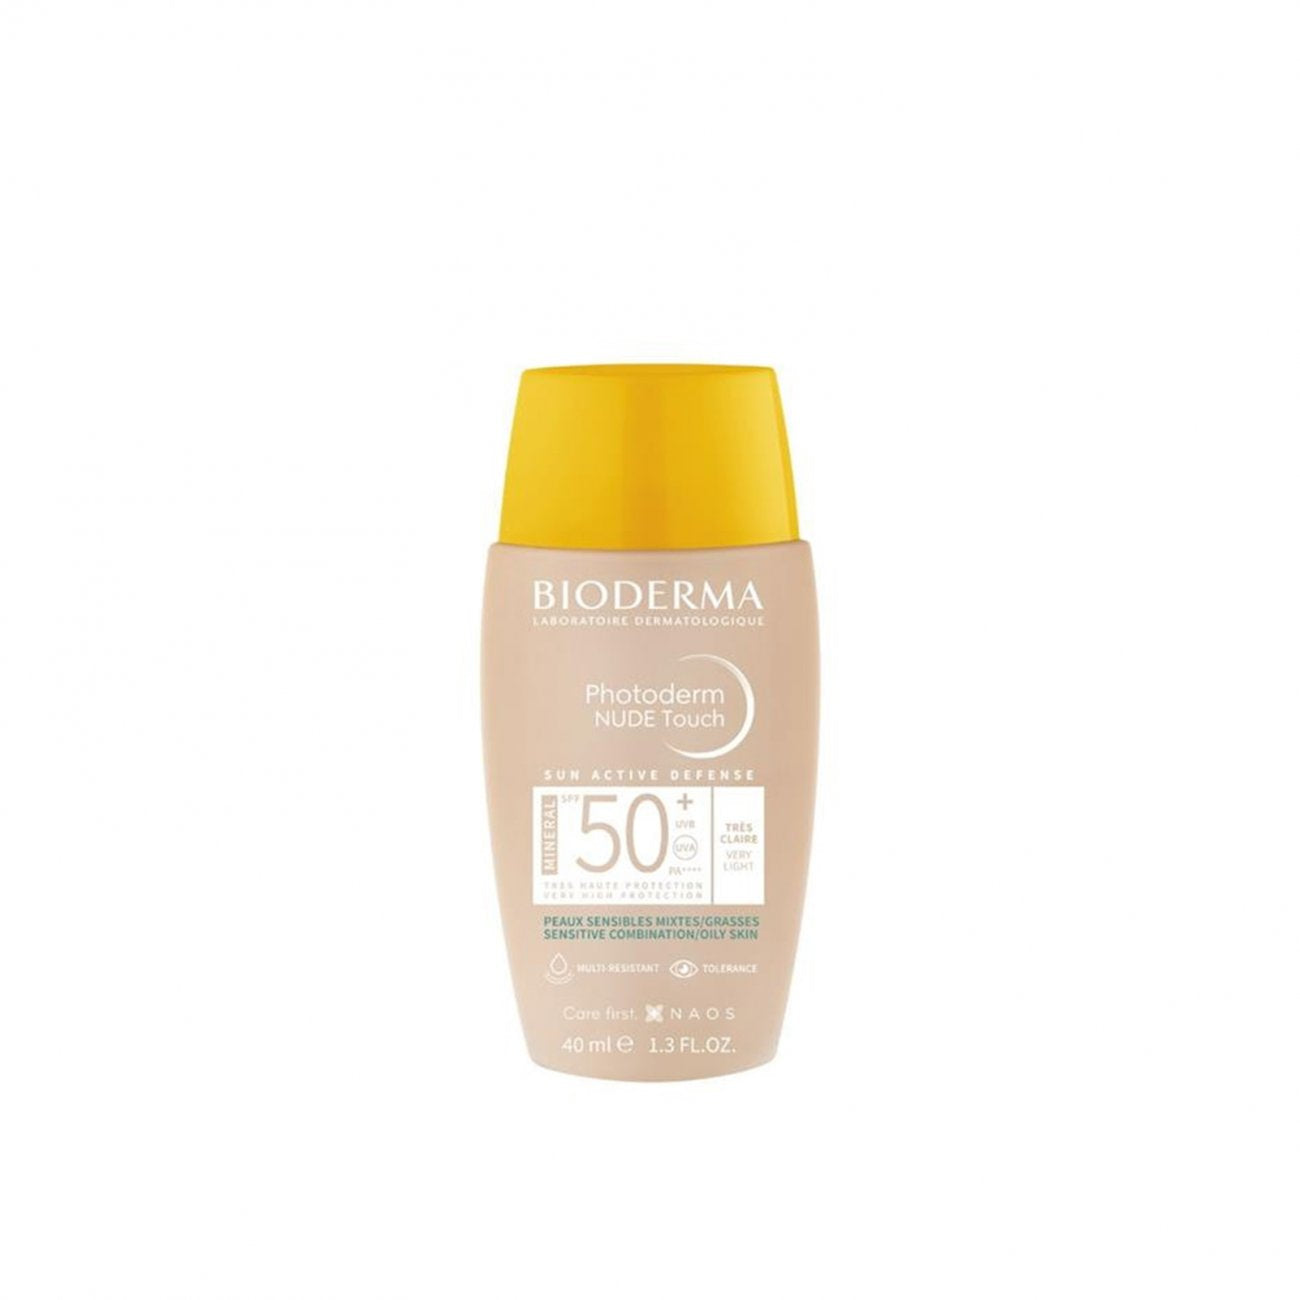 Photoderm Nude Touch SPF50+/PA ++++ Very Light Tint 40ml